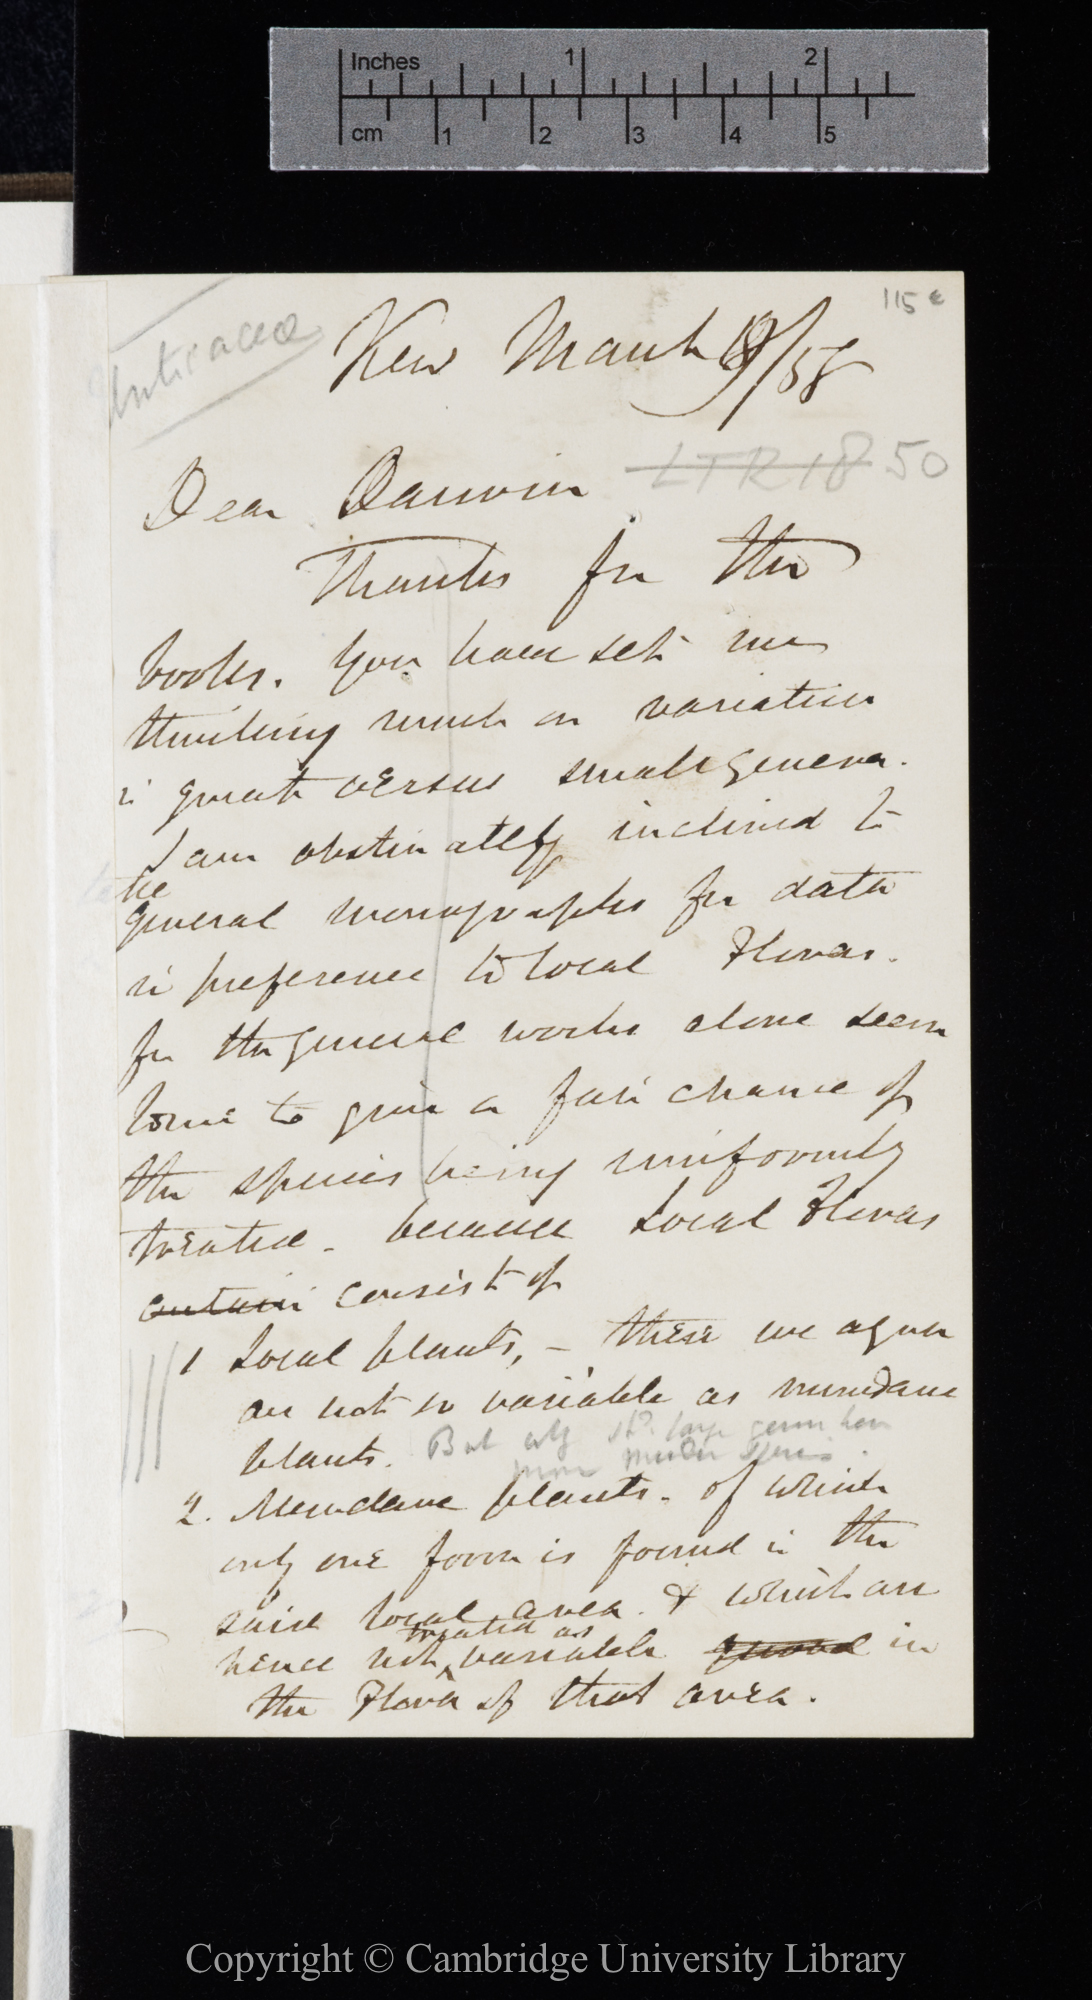 Letter from J. D. Hooker to C. R. Darwin   18 March 1858